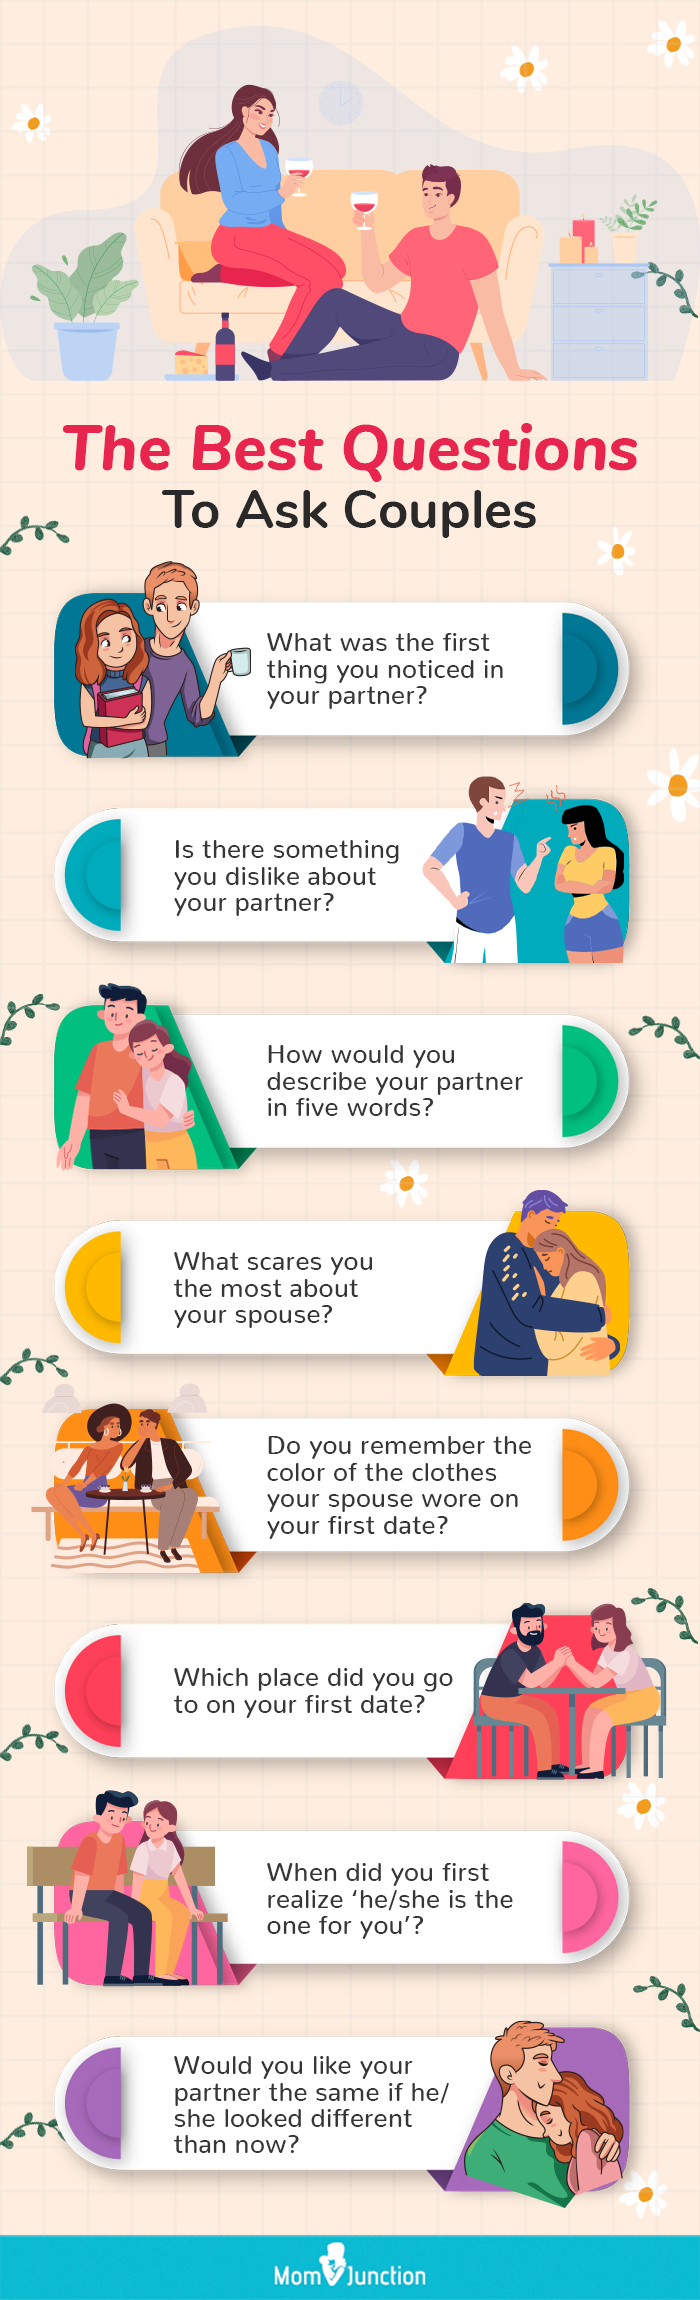 The Best Questions To Ask Couples 